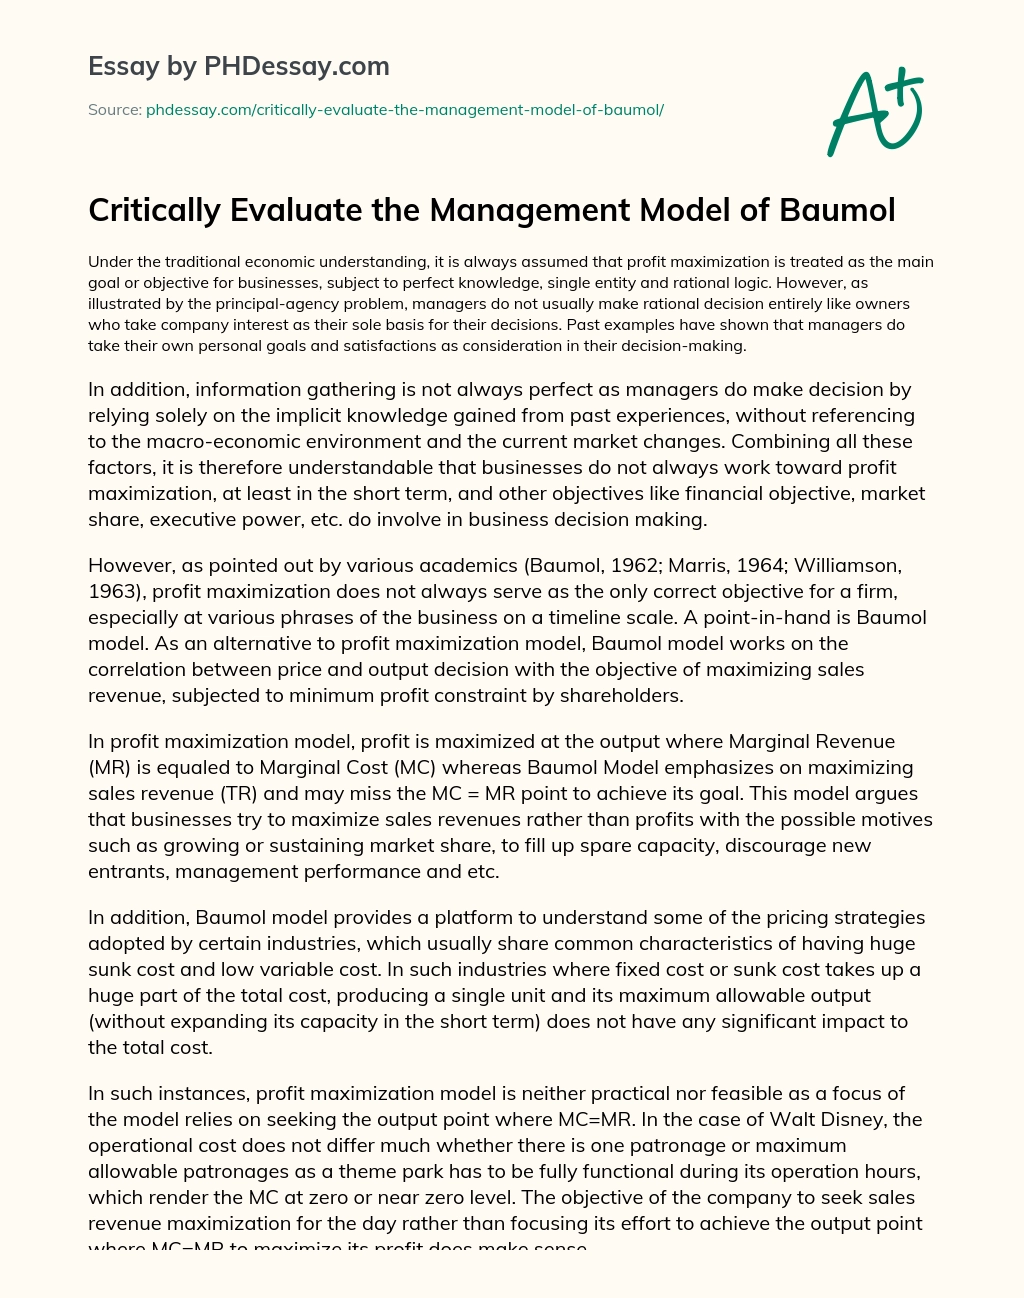 Critically Evaluate the Management Model of Baumol essay